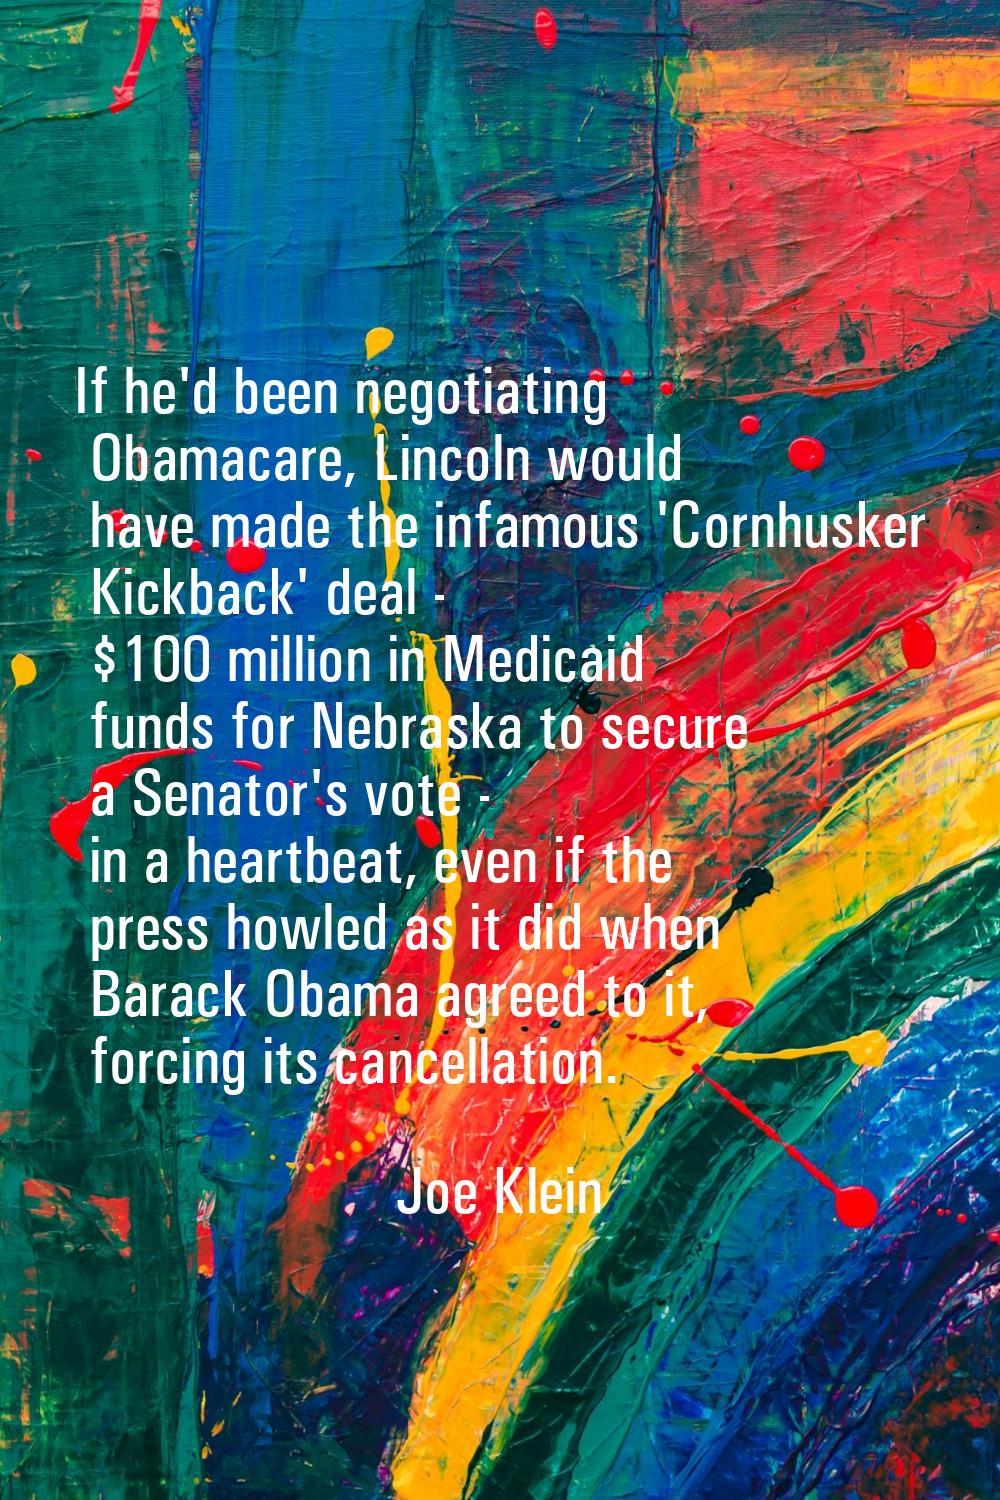 If he'd been negotiating Obamacare, Lincoln would have made the infamous 'Cornhusker Kickback' deal